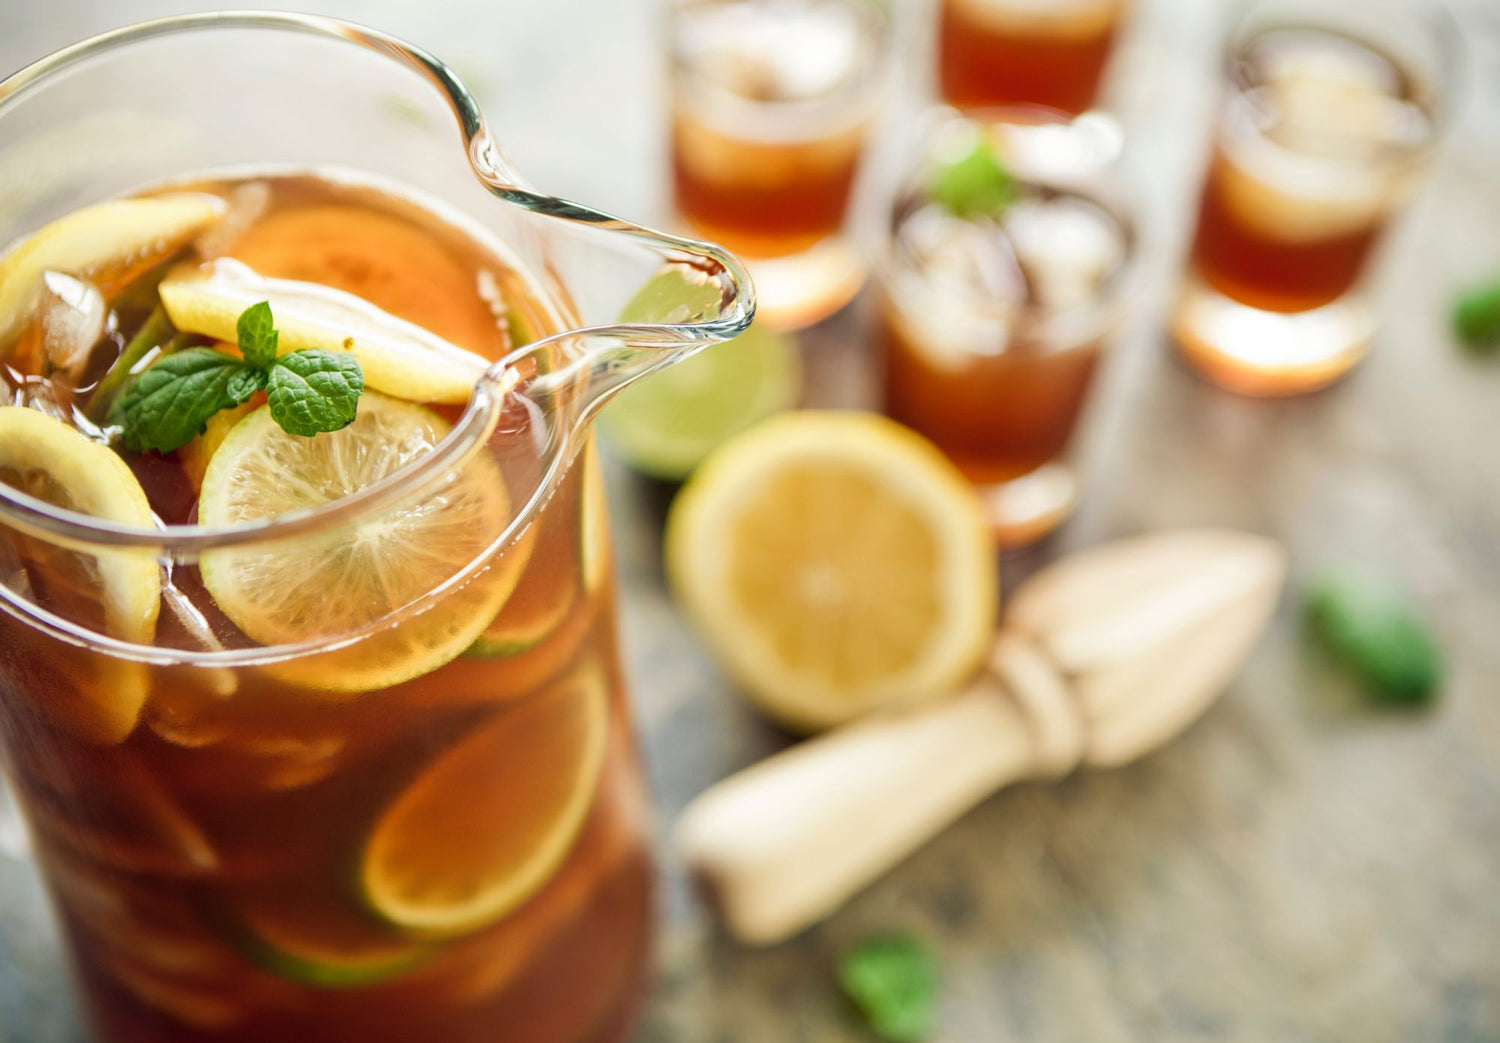 Sip Your Way to Summer Bliss with these Irresistible Iced Tea Recipes!